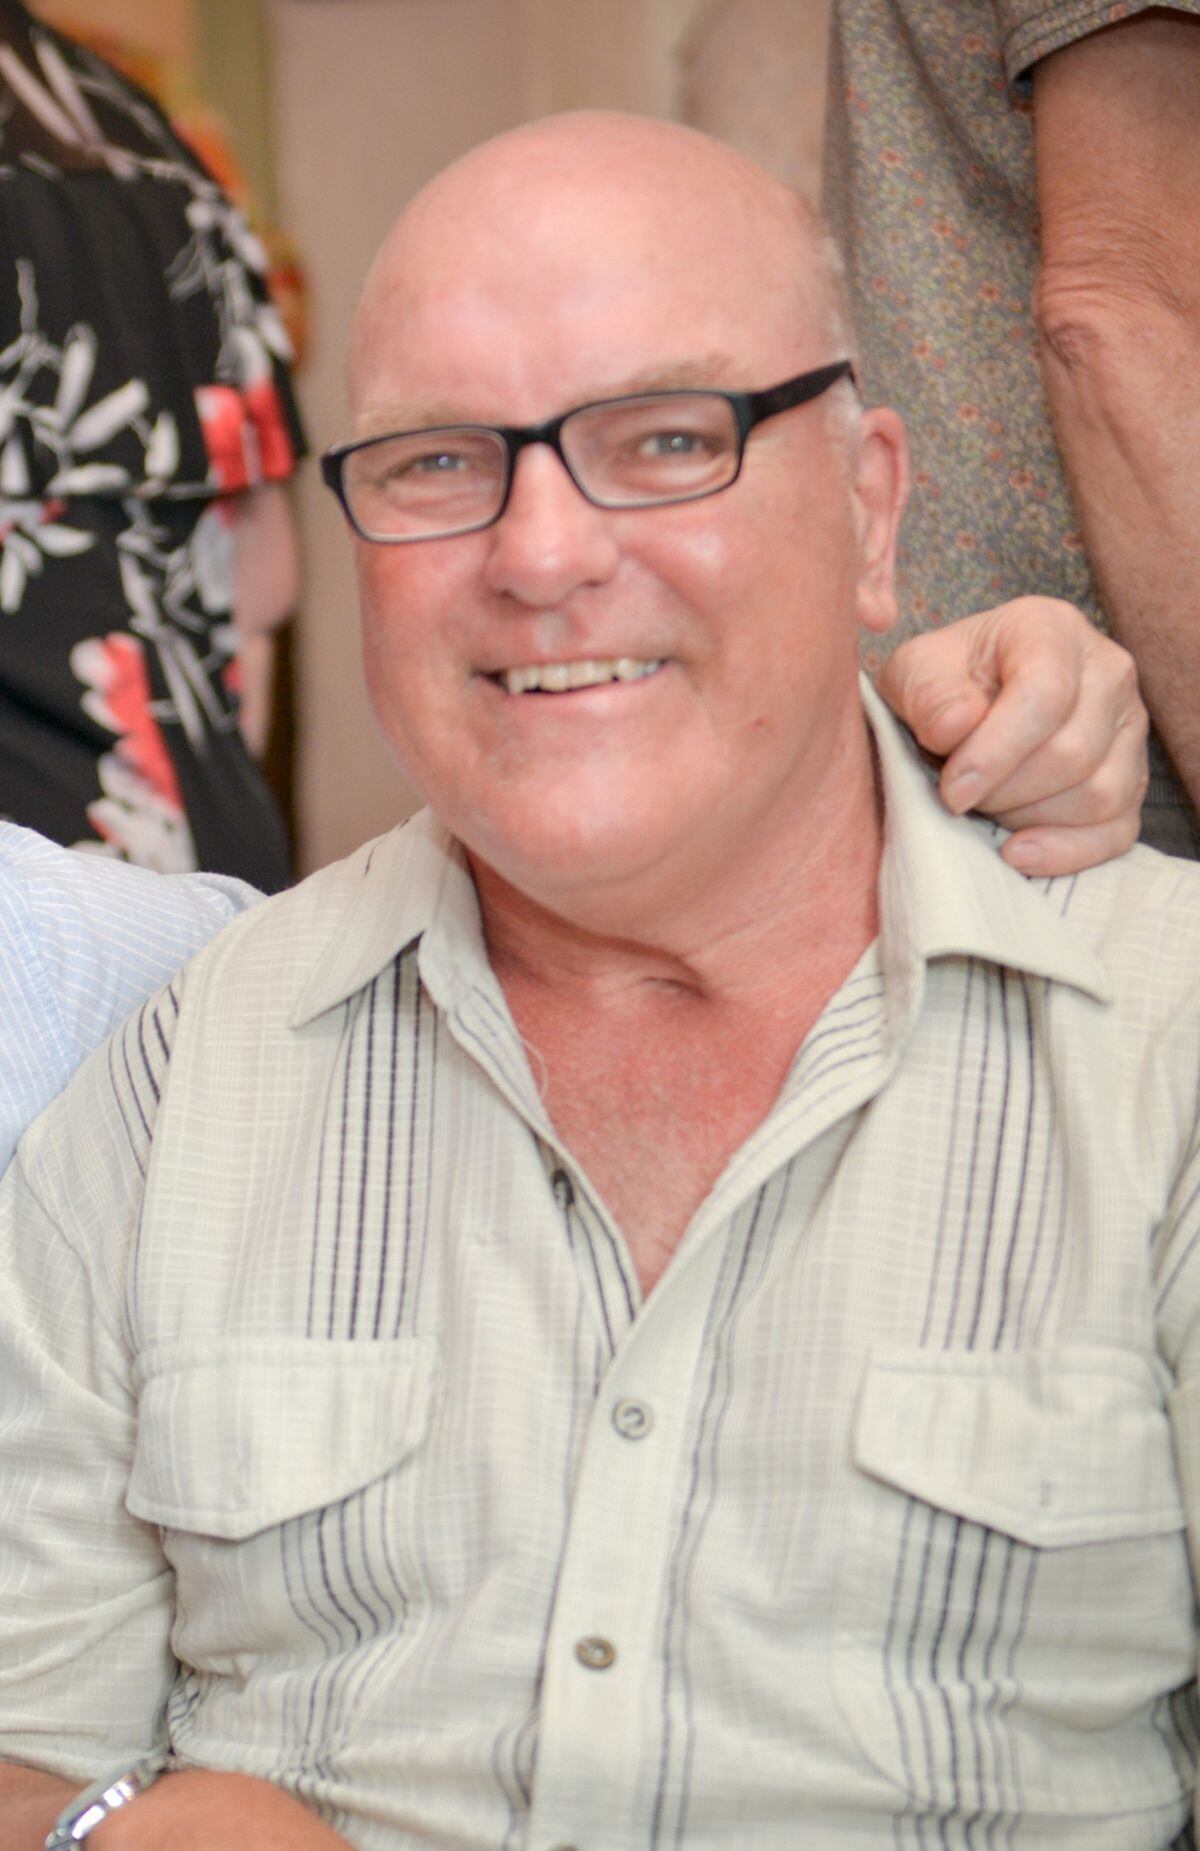 Ian Tomkinson, of Newport, who has died aged 64.